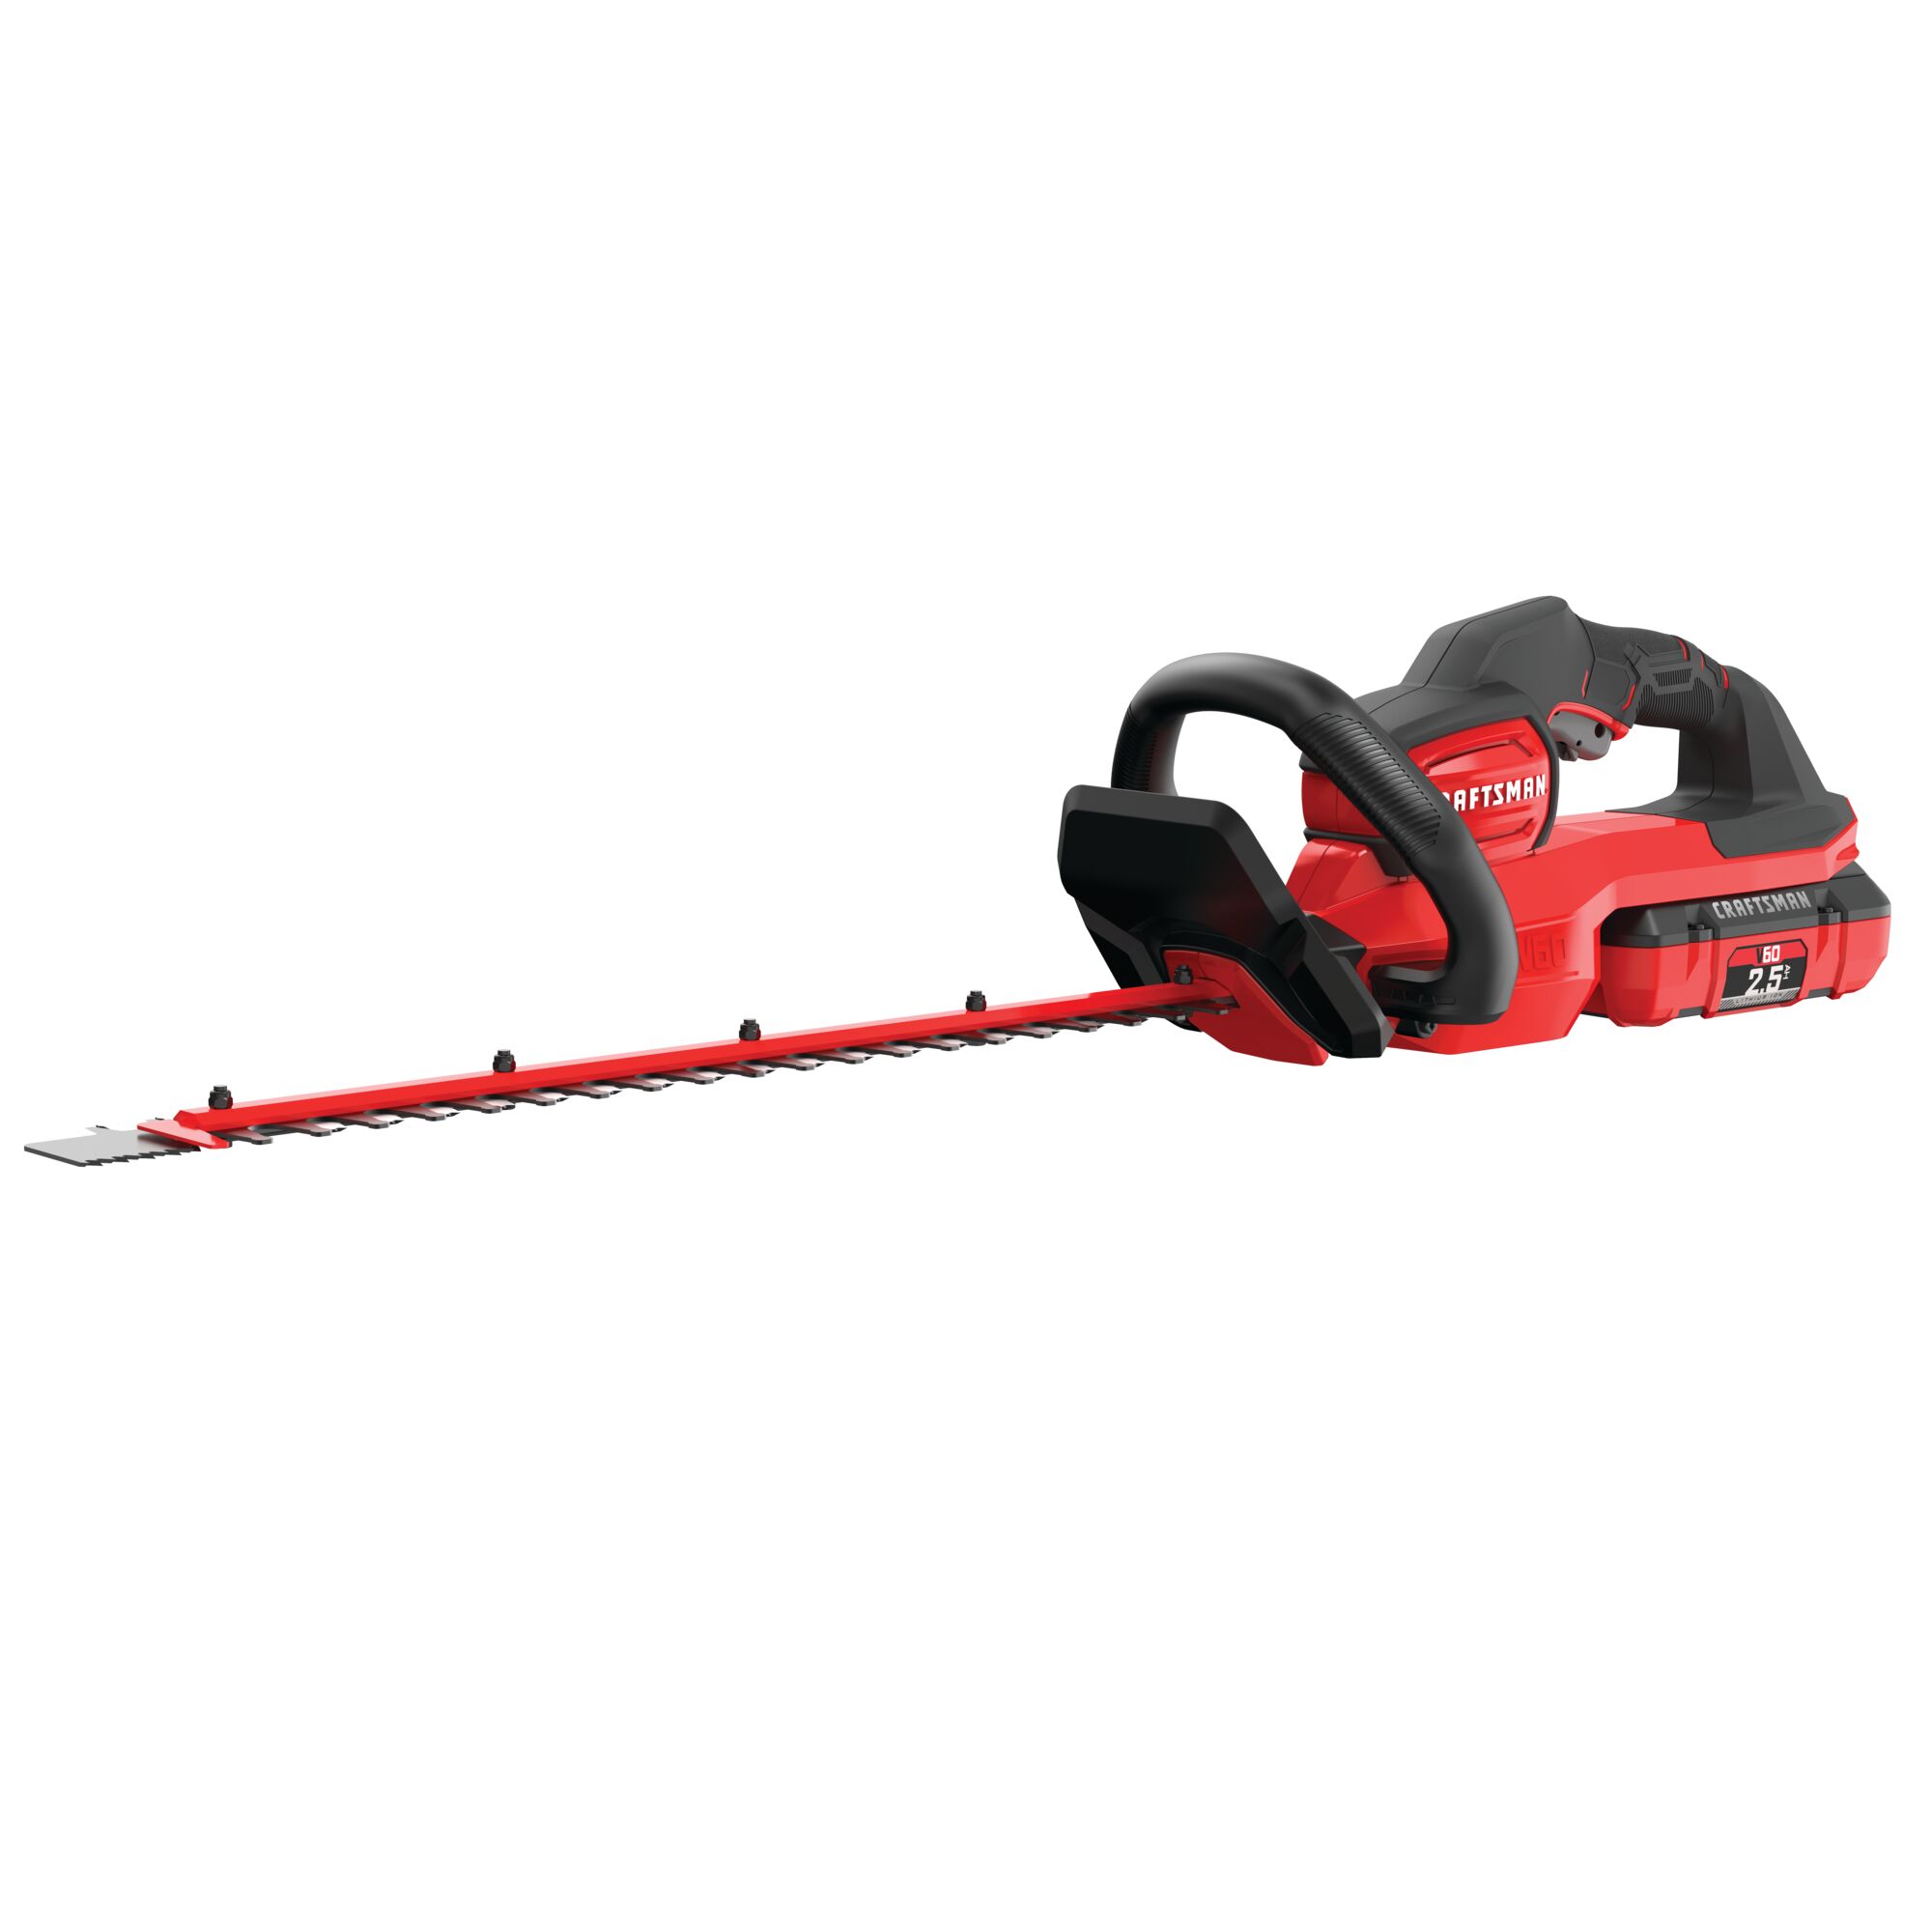 Cordless 24 inch hedge trimmer kit 2.5 Ampere hours.